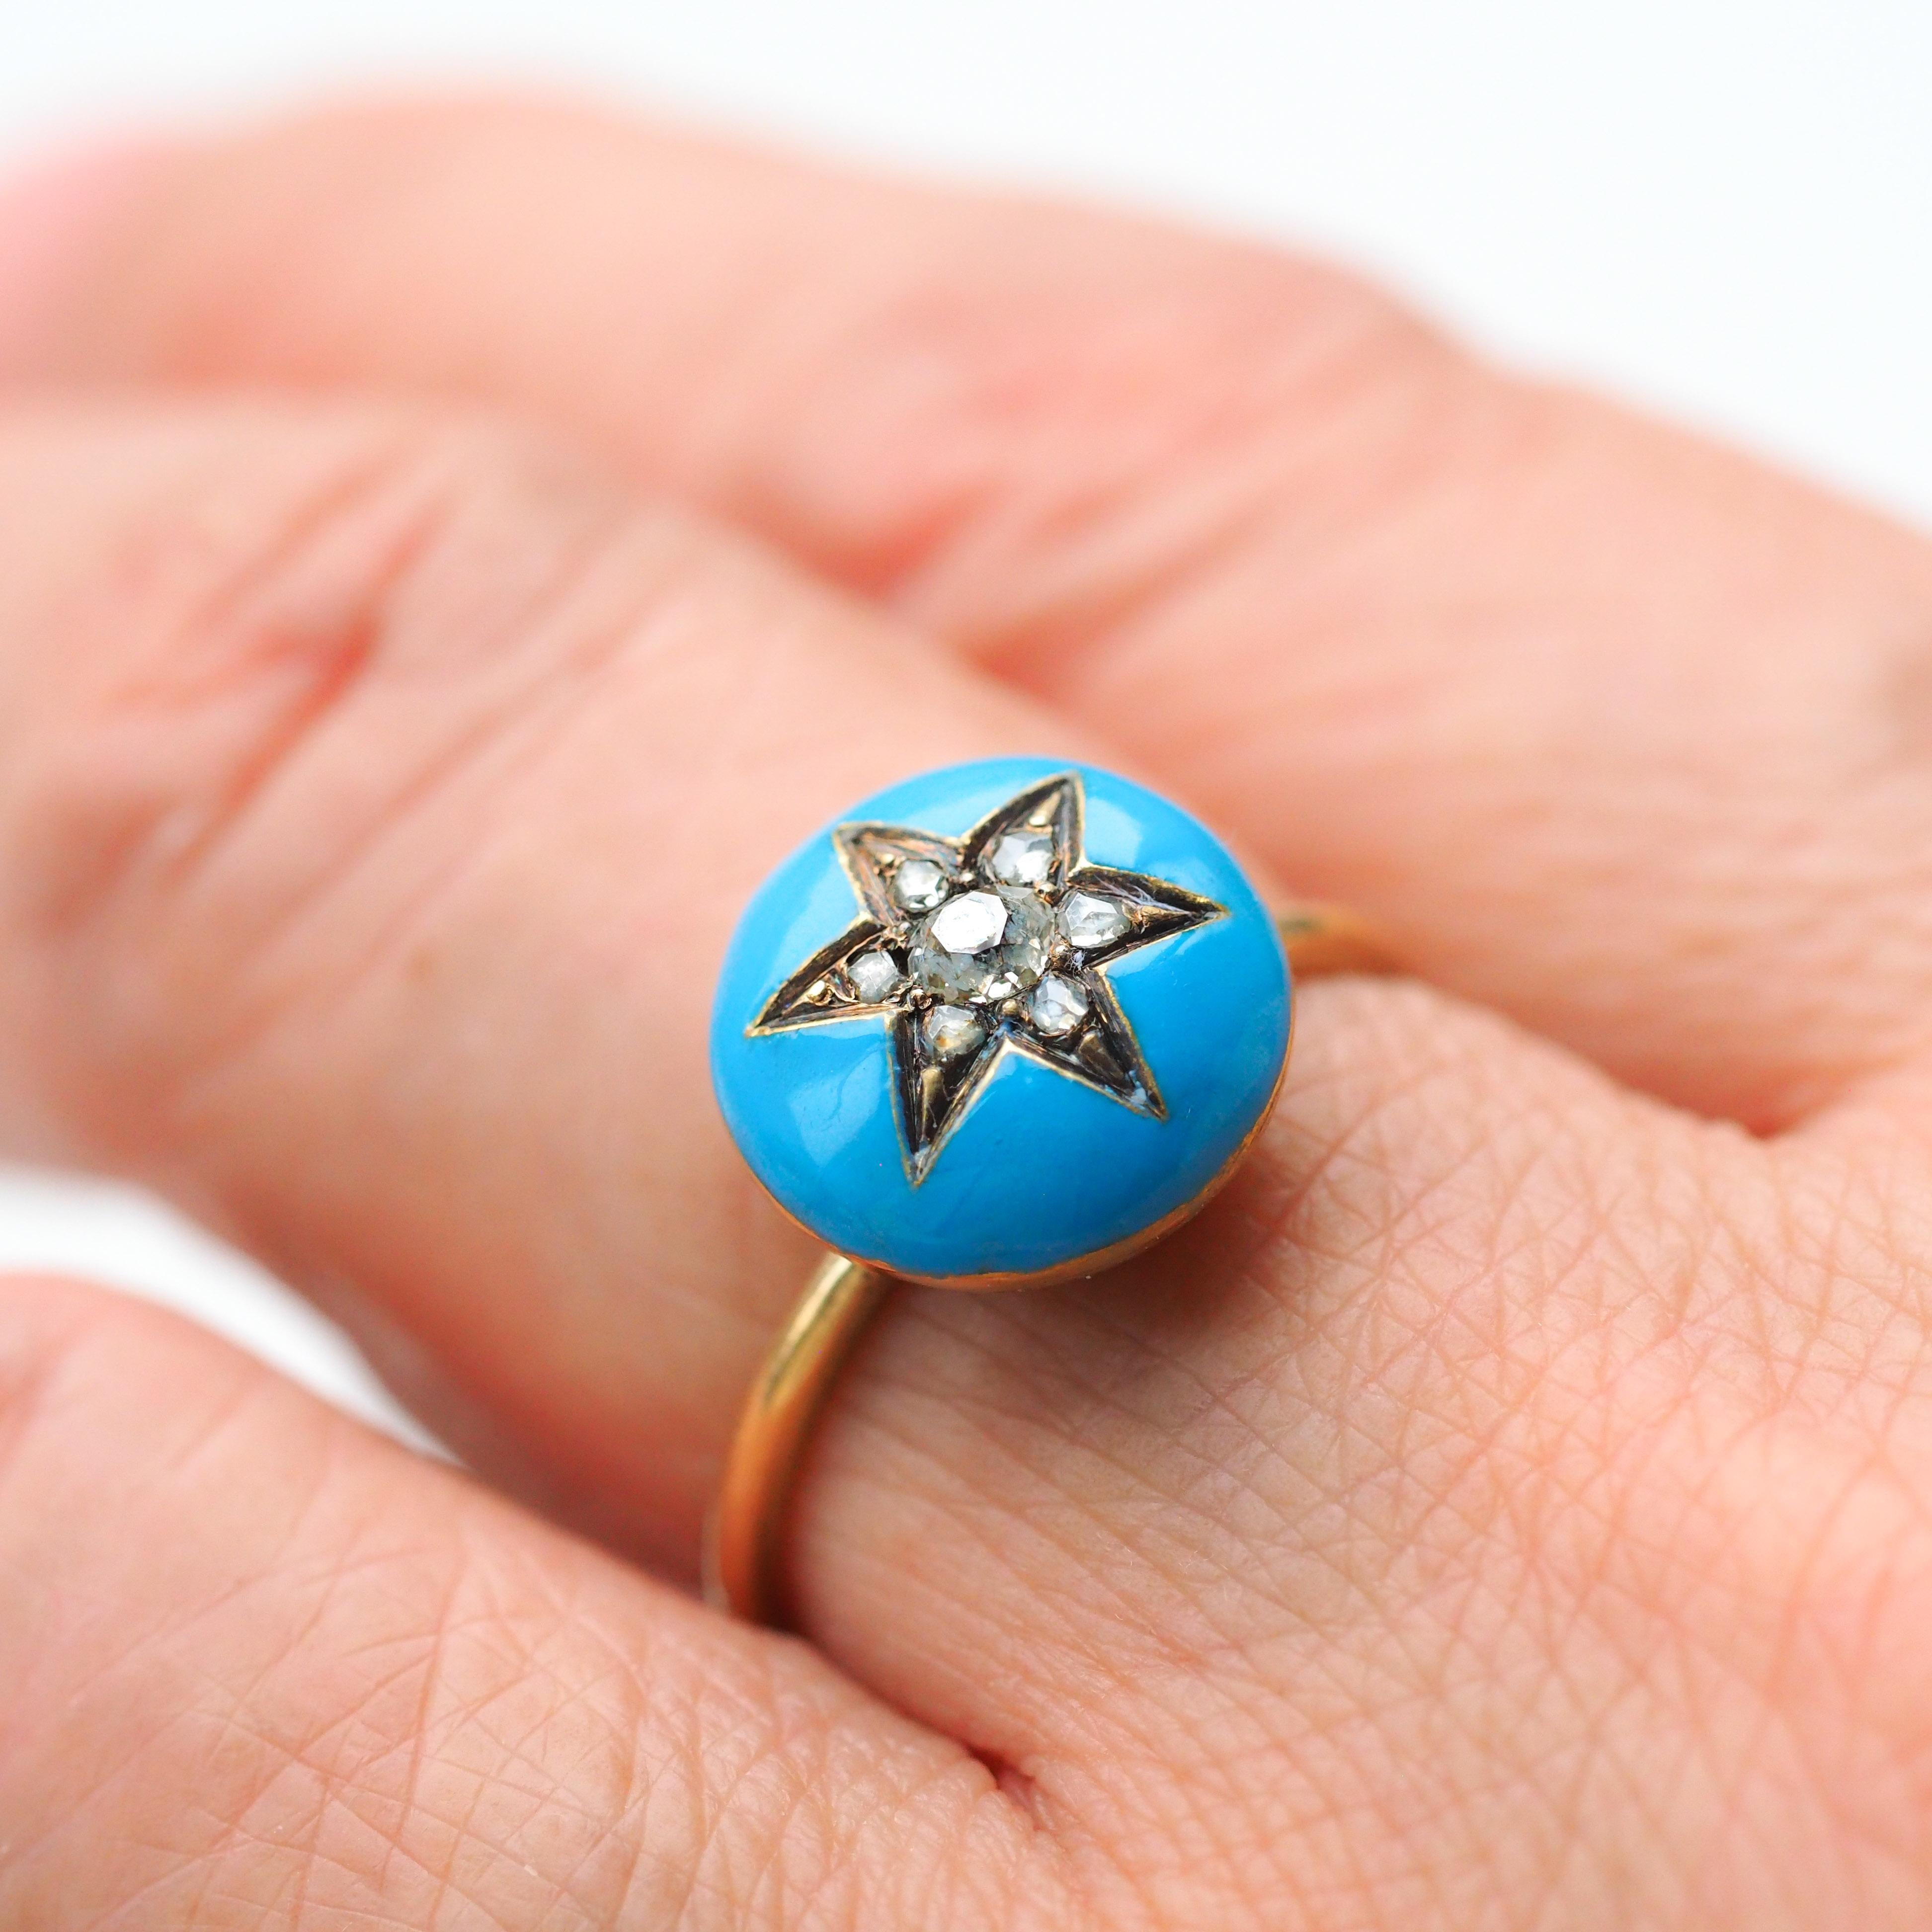 Antique Victorian Diamond Star Ring 9K Gold Blue Enamel Cabochon - c.1890 In Good Condition For Sale In London, GB